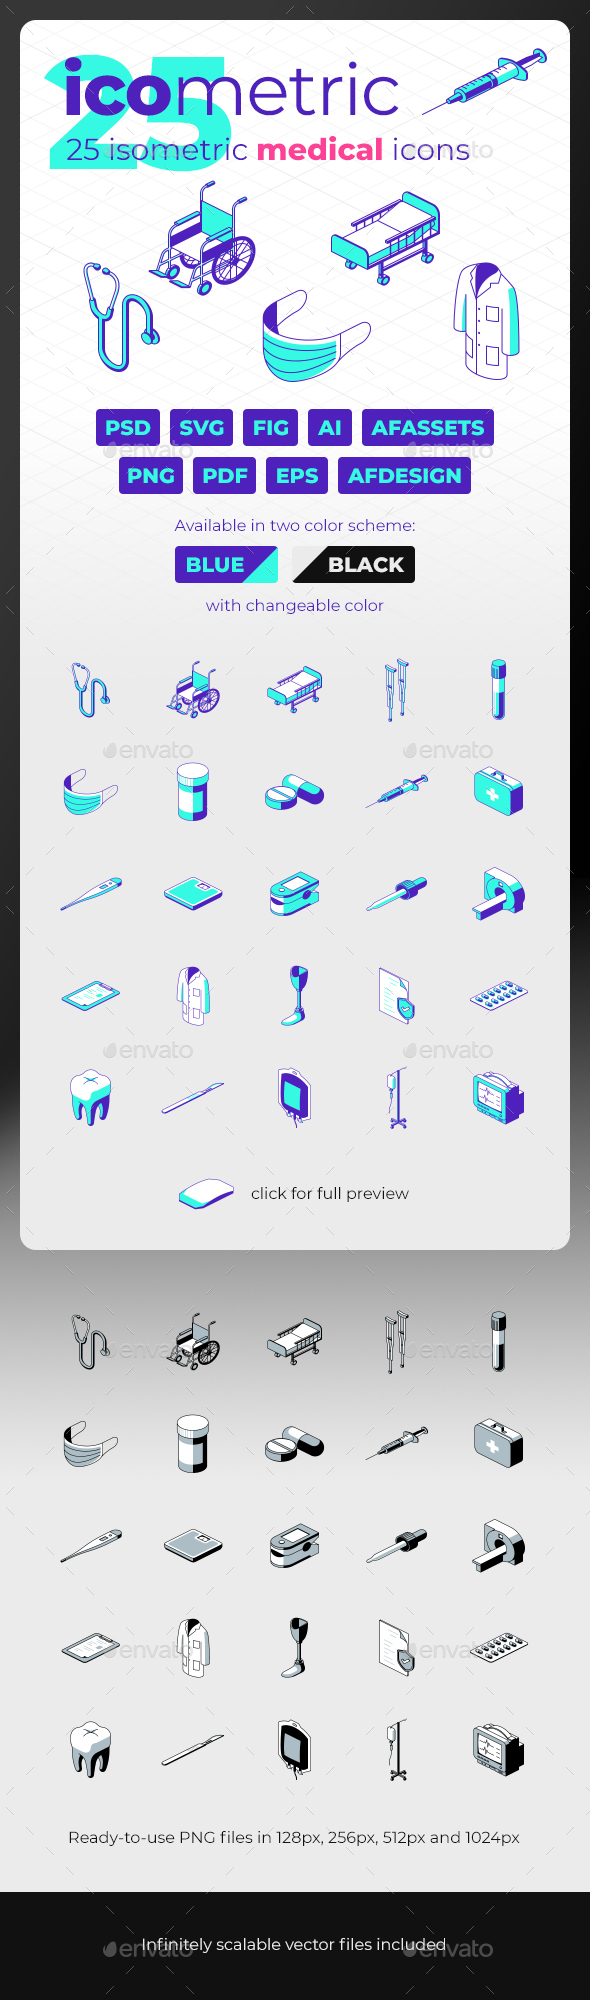 [DOWNLOAD]Icometric - Medical Icons